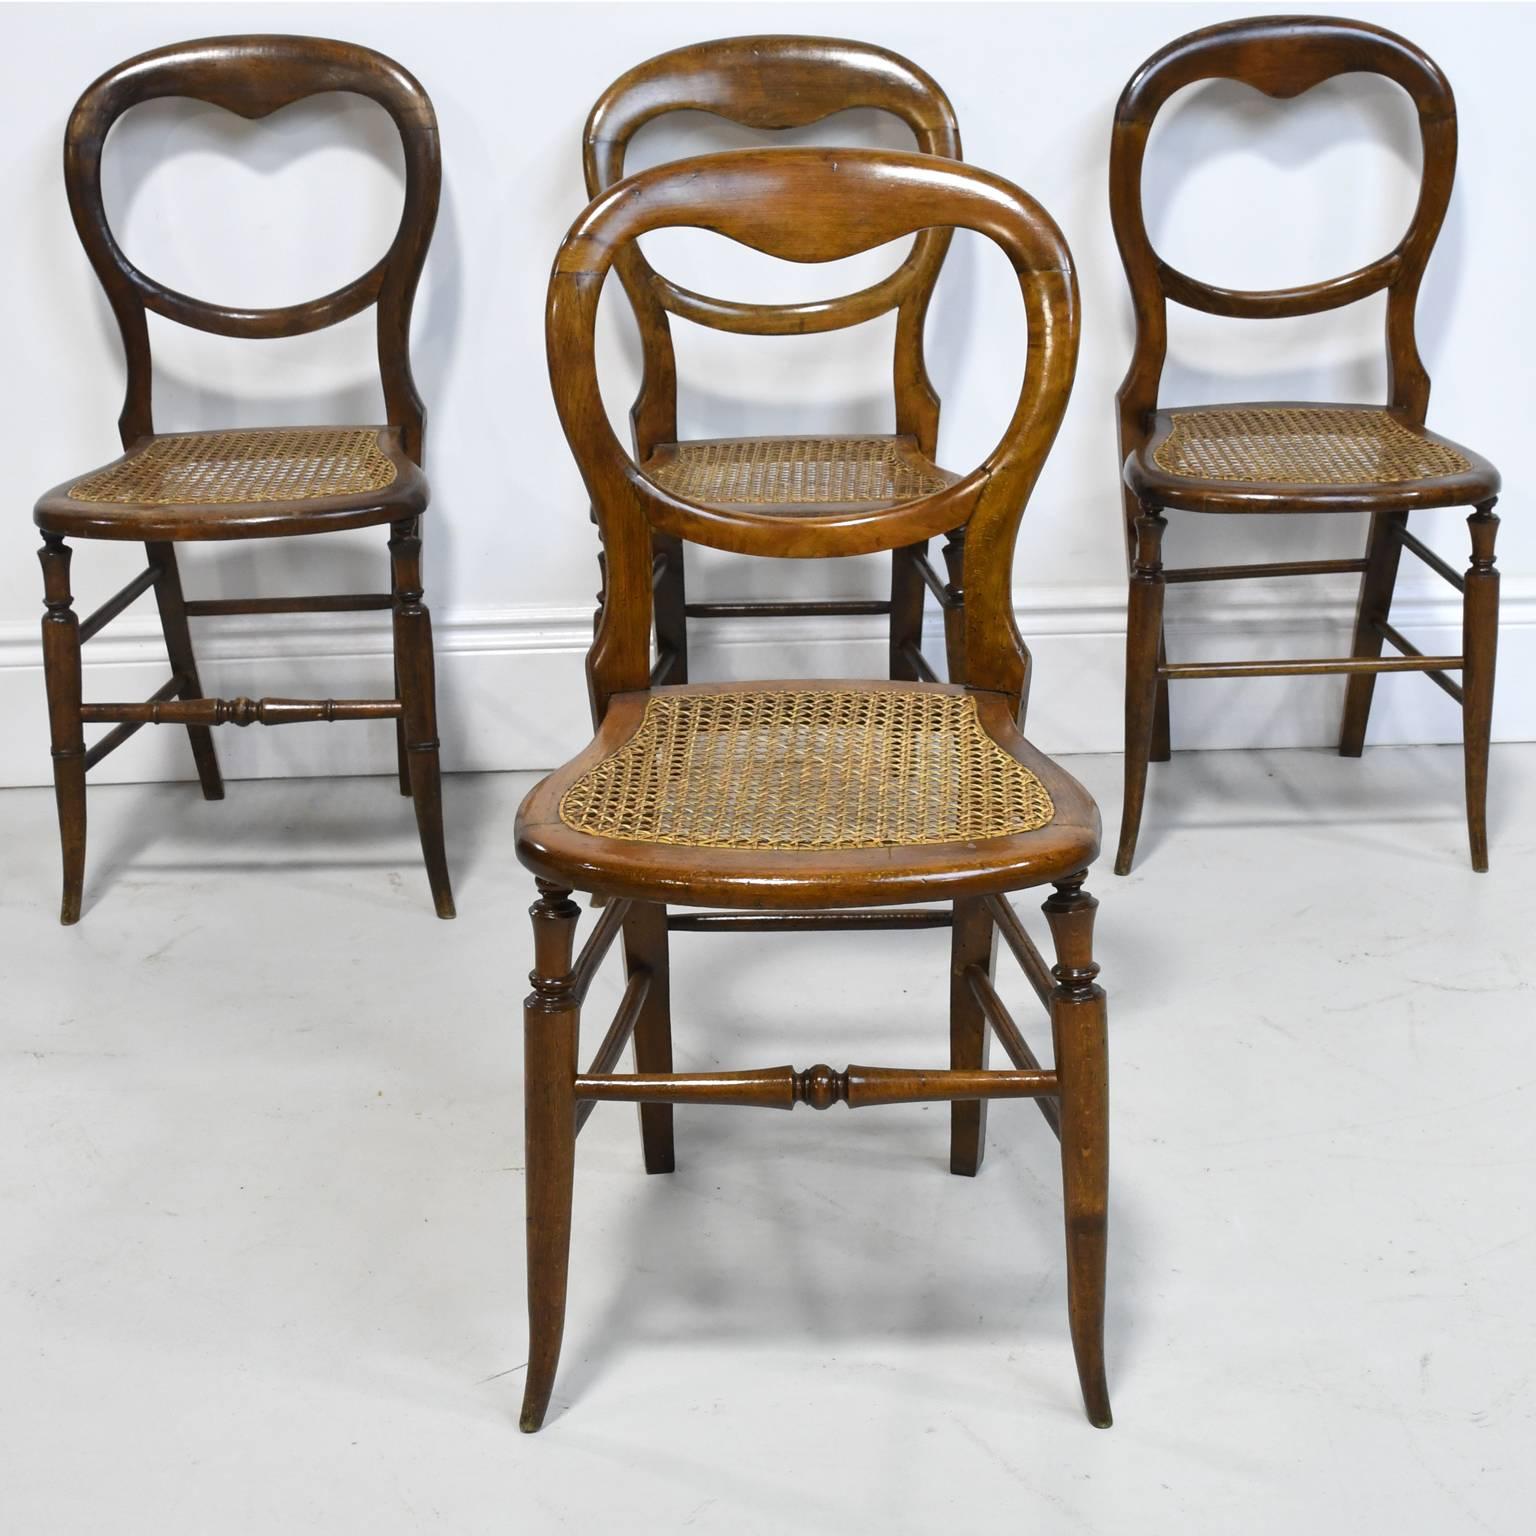 A charming set of four Louis Philippe dining chairs with balloon backs, splayed legs and cane seats, France, circa 1845. 
Measures: 16" wide x 18" deep x 32 3/4" high.